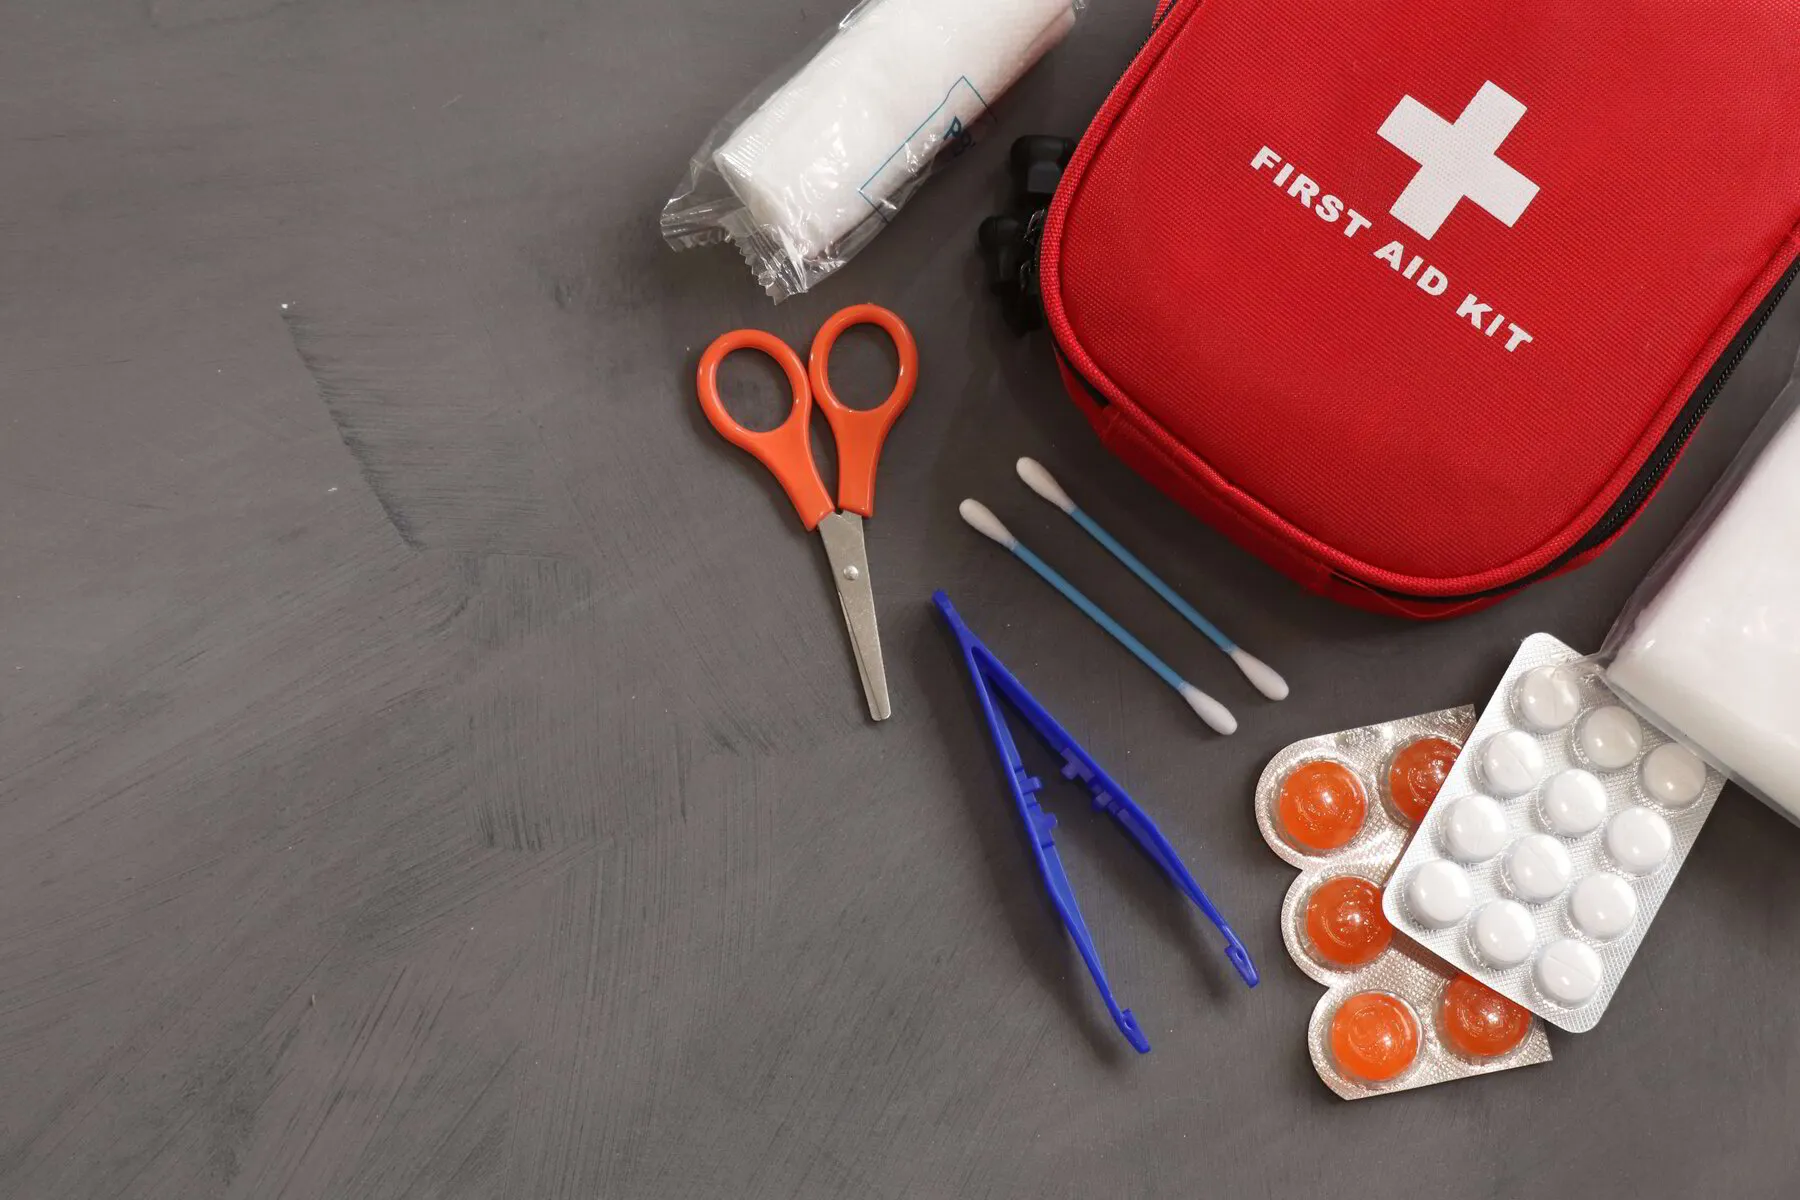 First Aid Kit – Who needs them?